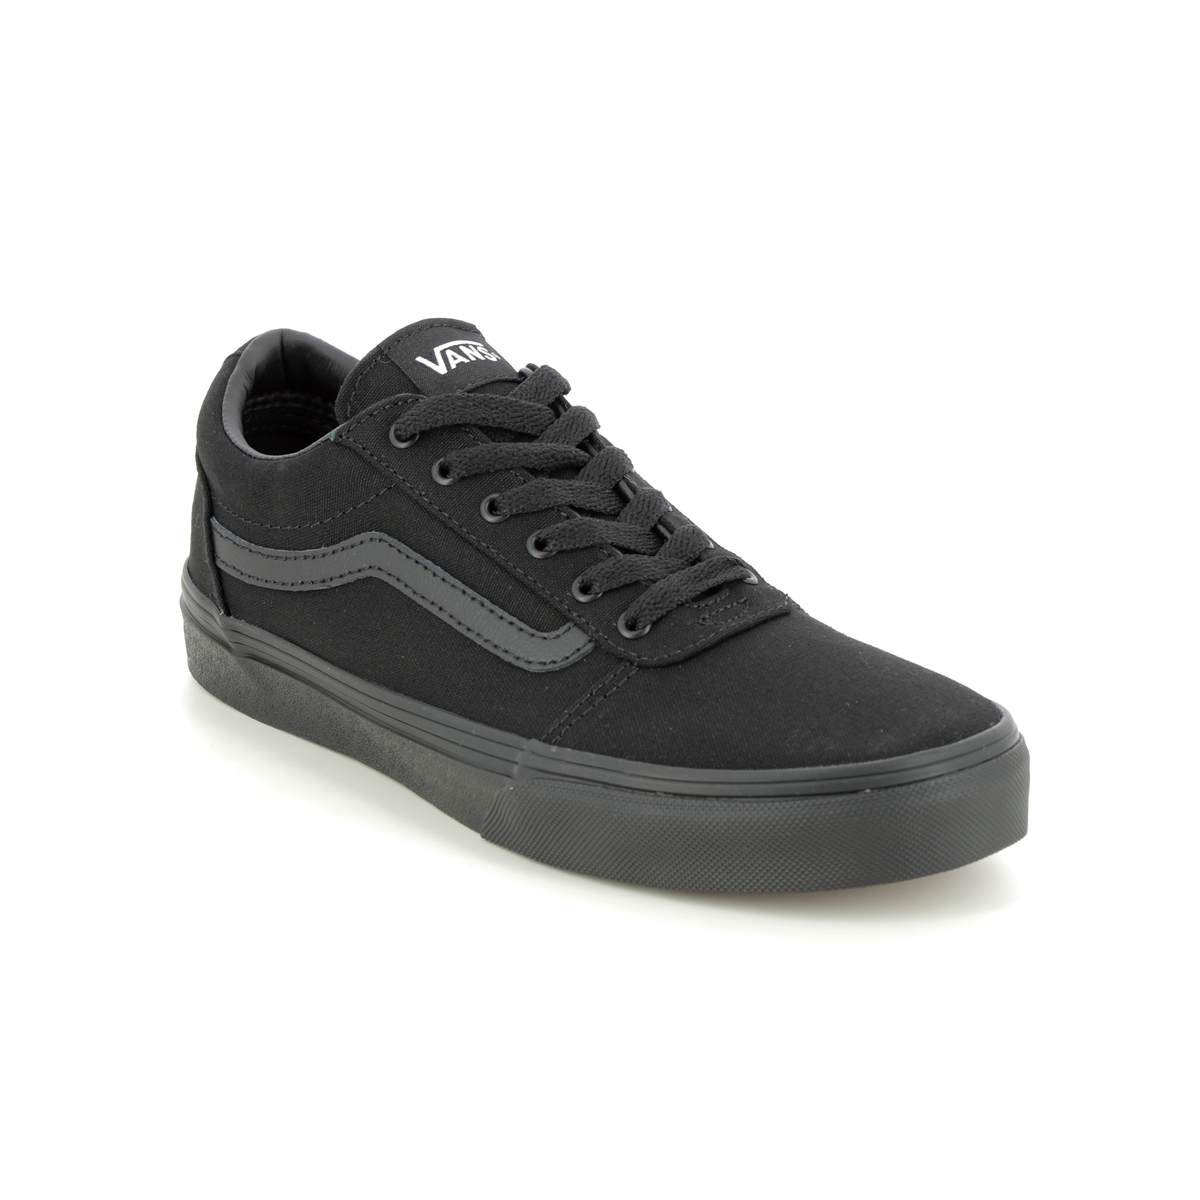 Vans Ward Yth Black Kids Trainers  Vn0A38J91-861 In Size 6 In Plain Black Vans Boys Trainers For kids